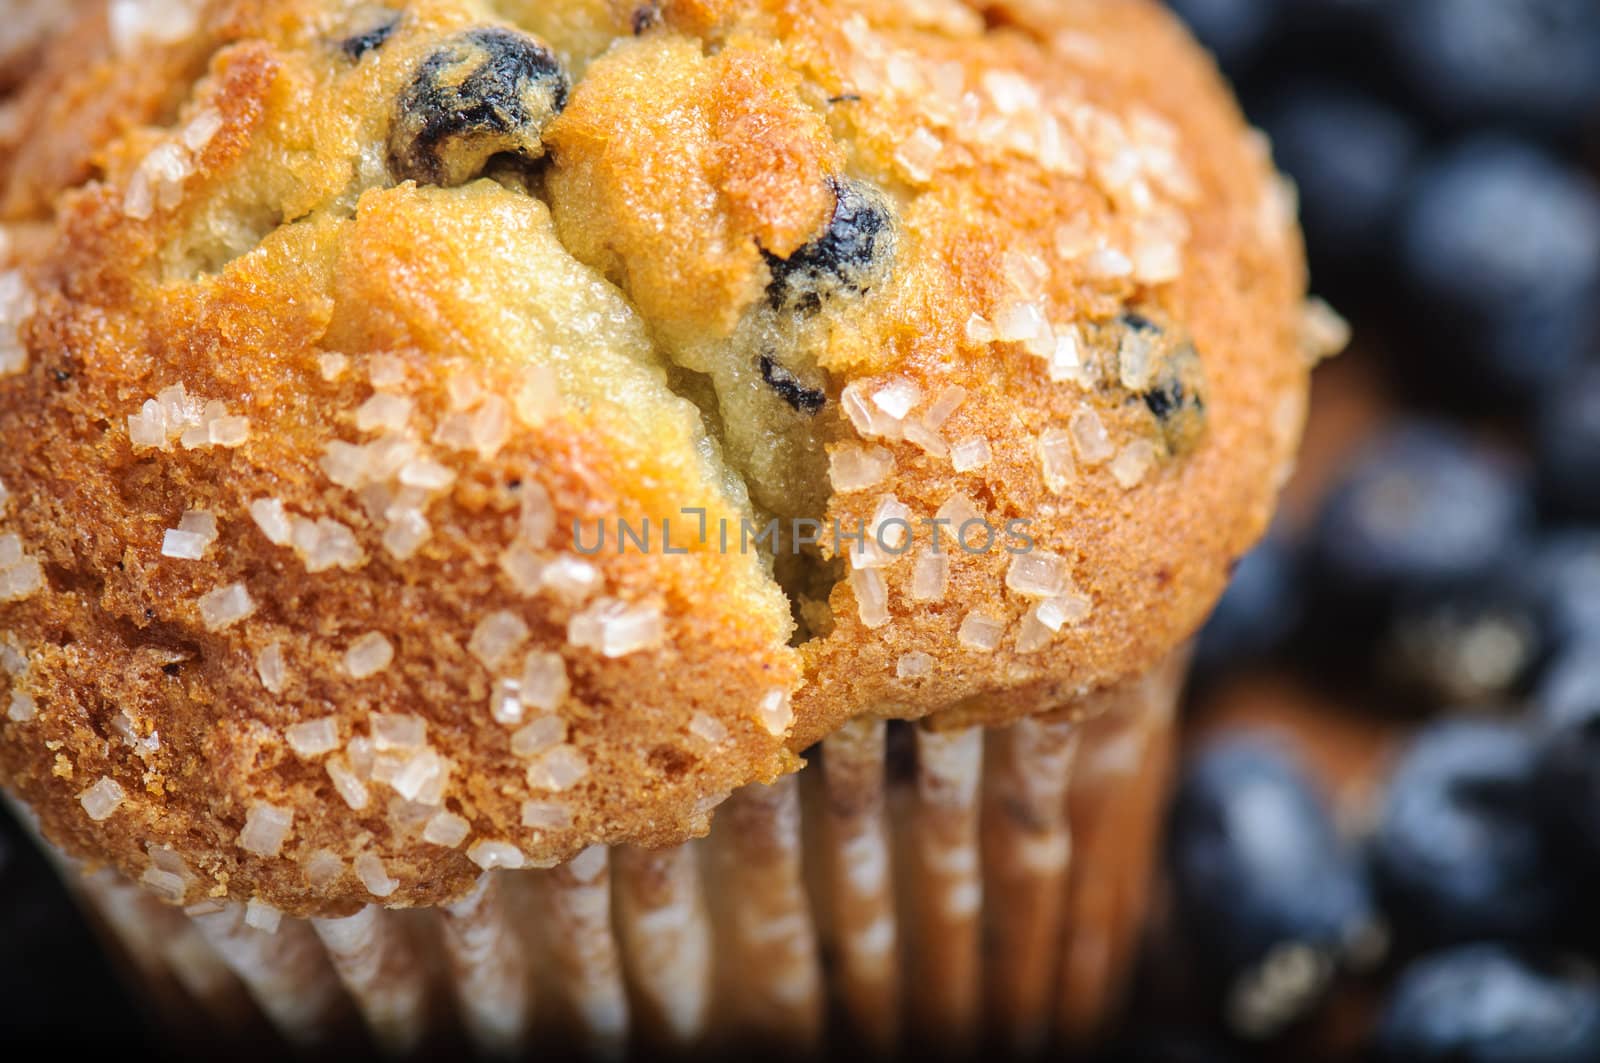 Blueberry Muffin with Blueberries in Background